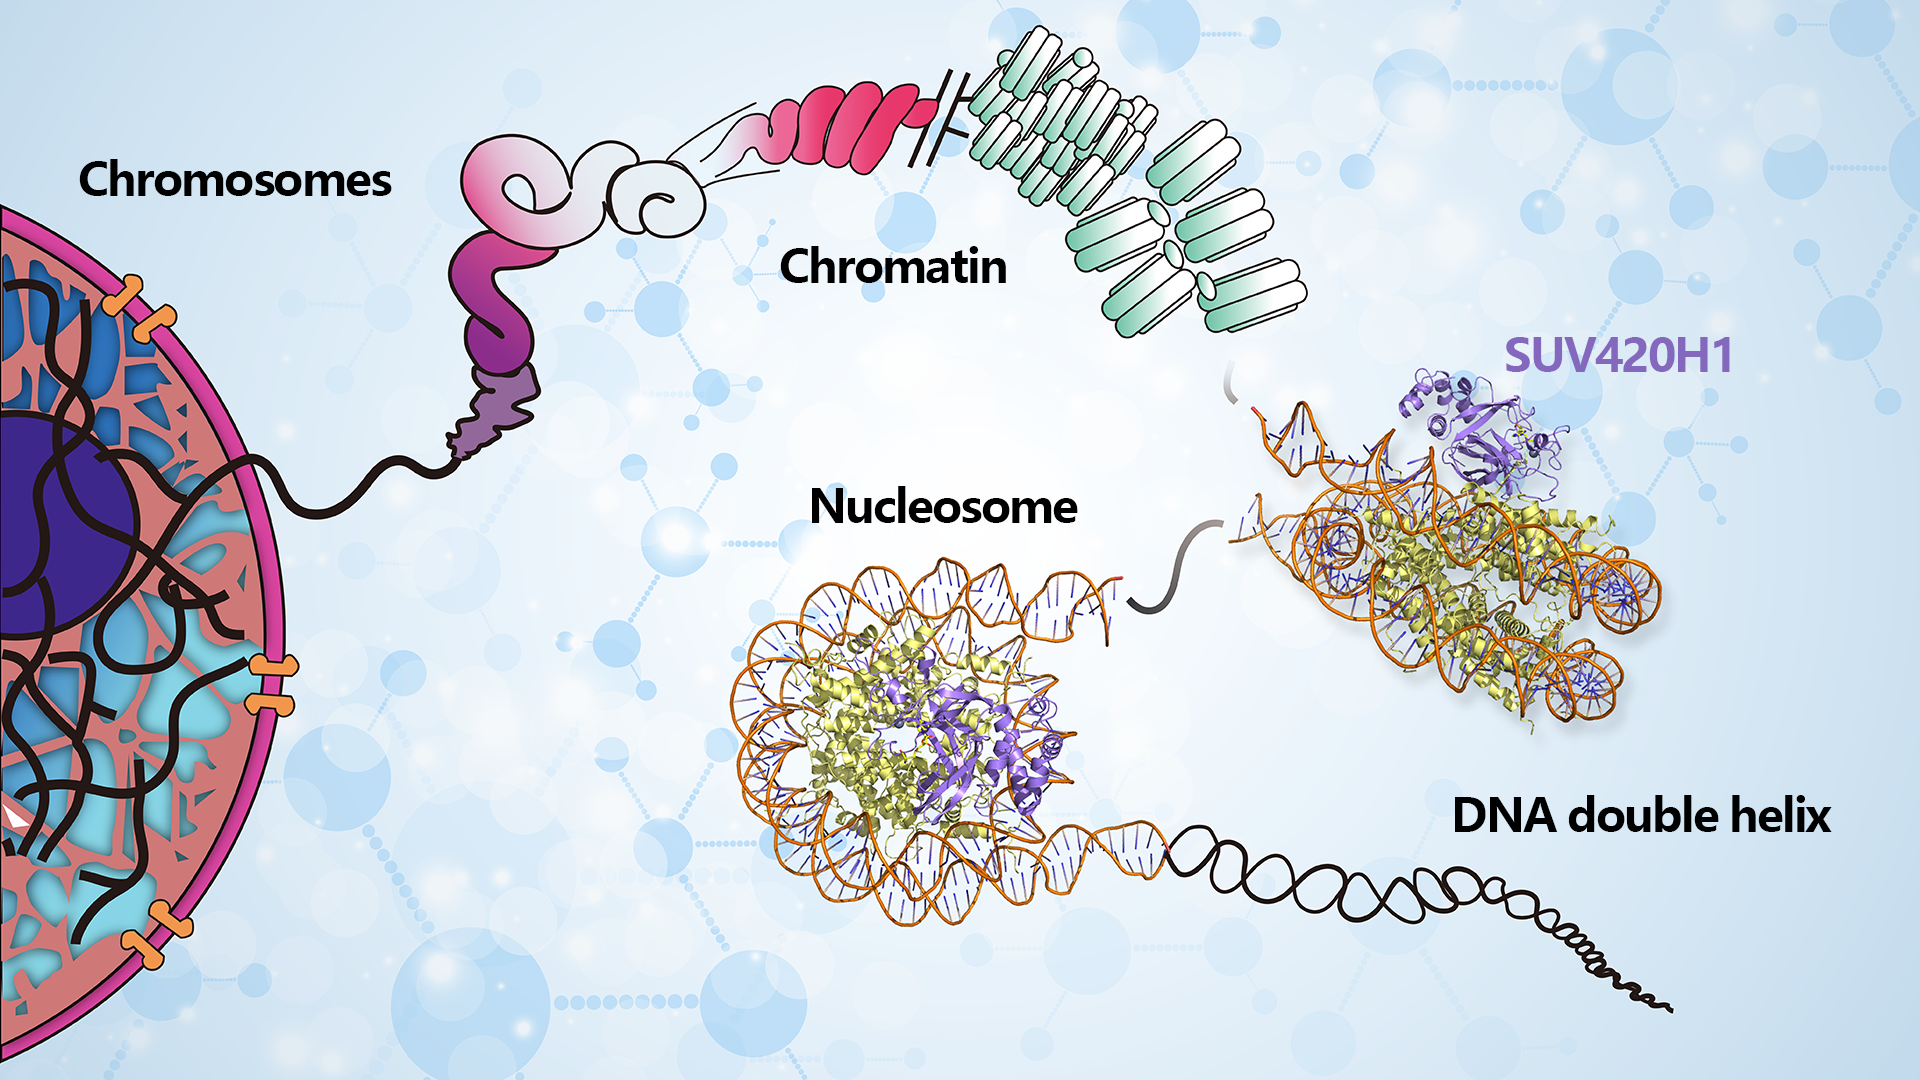 Researchers reveal molecular mechanism of nucleosome recognition and methylation by SUV420H1